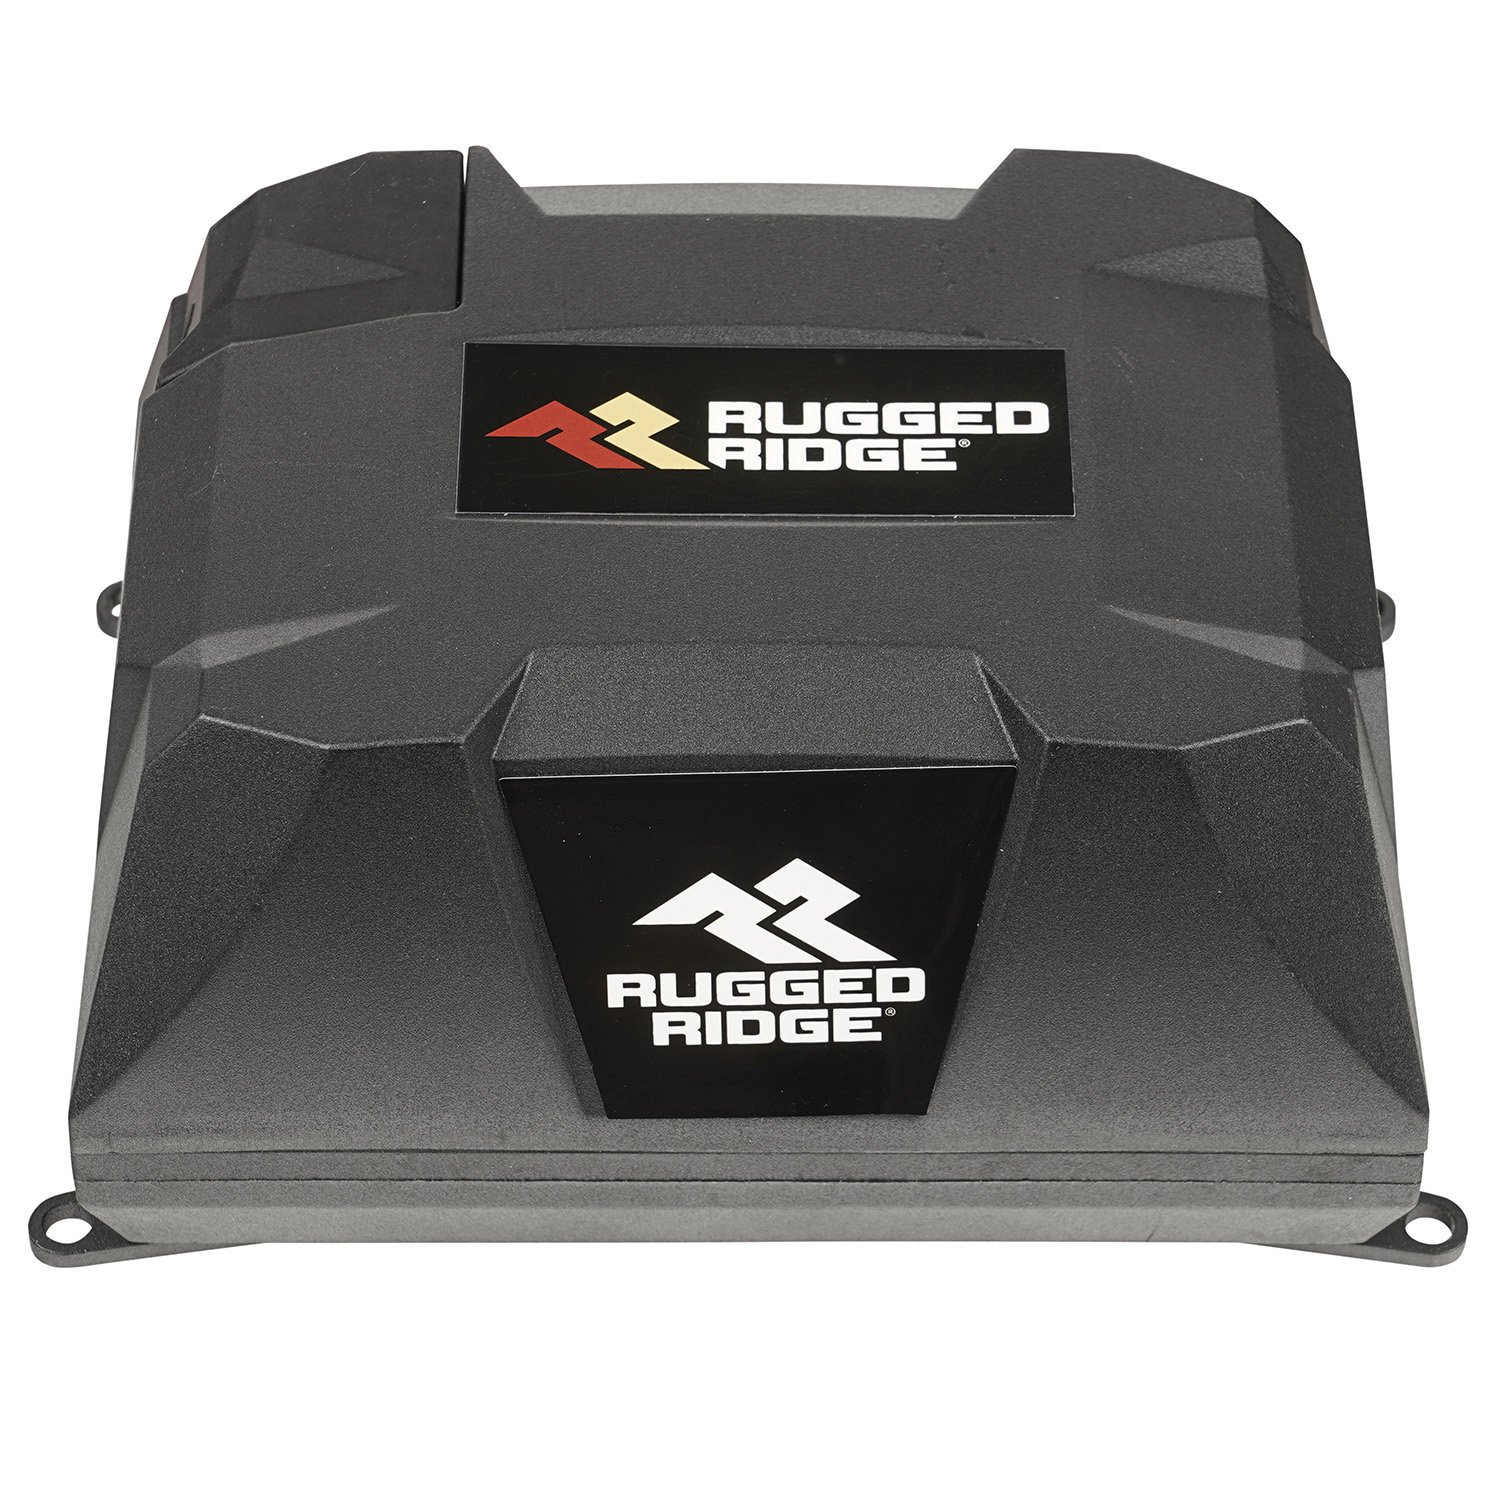 Rugged Ridge 15103.38 - Solenoid Box with Wires for Trekker Winch